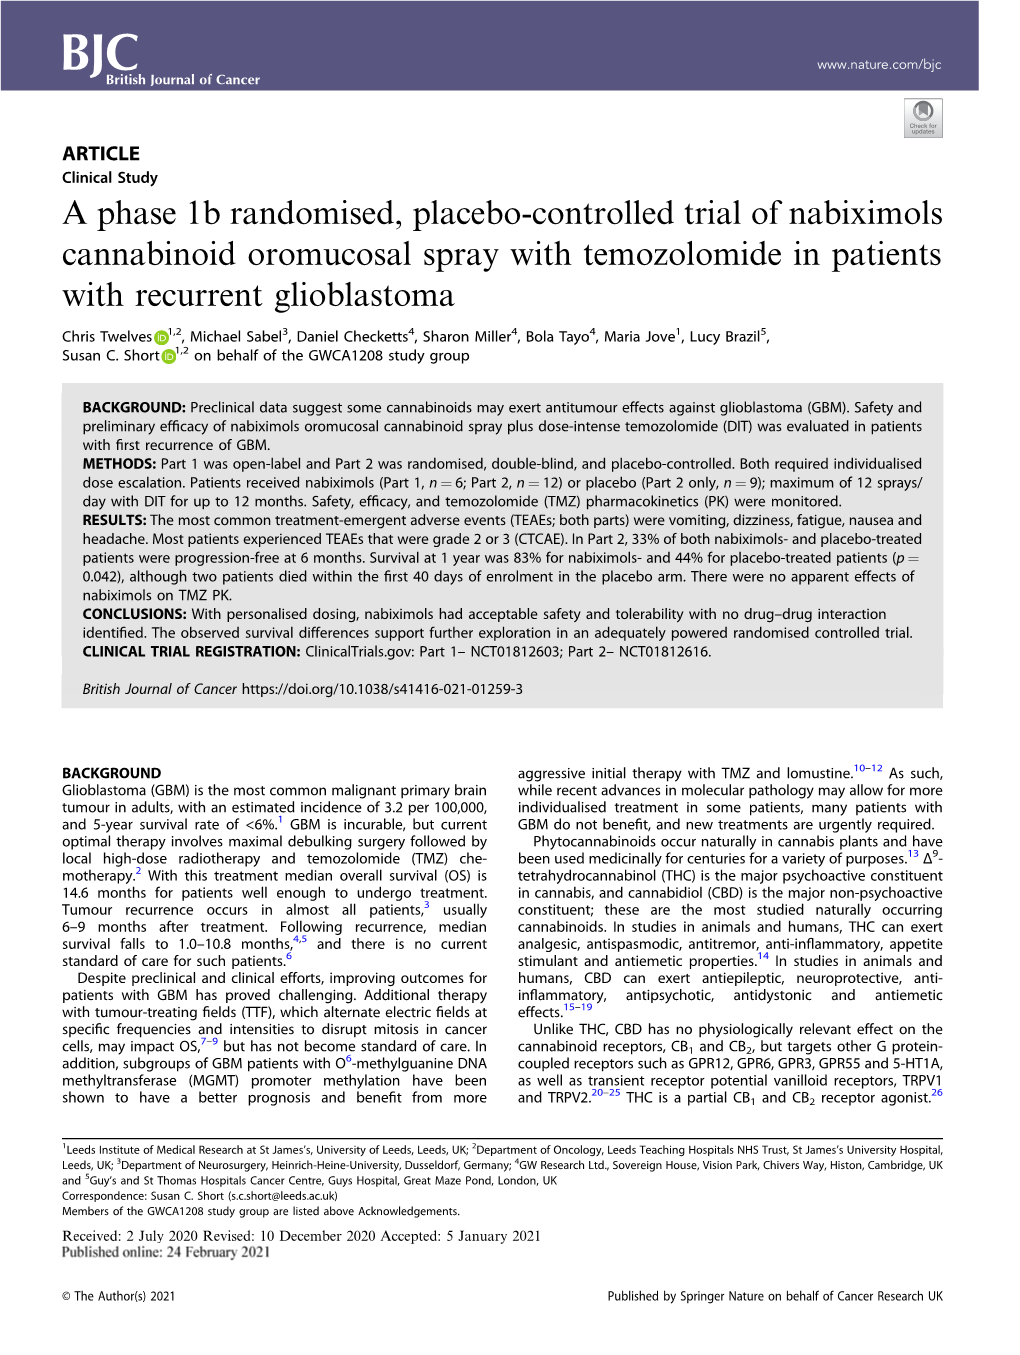 A Phase 1B Randomised, Placebo-Controlled Trial of Nabiximols Cannabinoid Oromucosal Spray with Temozolomide in Patients with Recurrent Glioblastoma